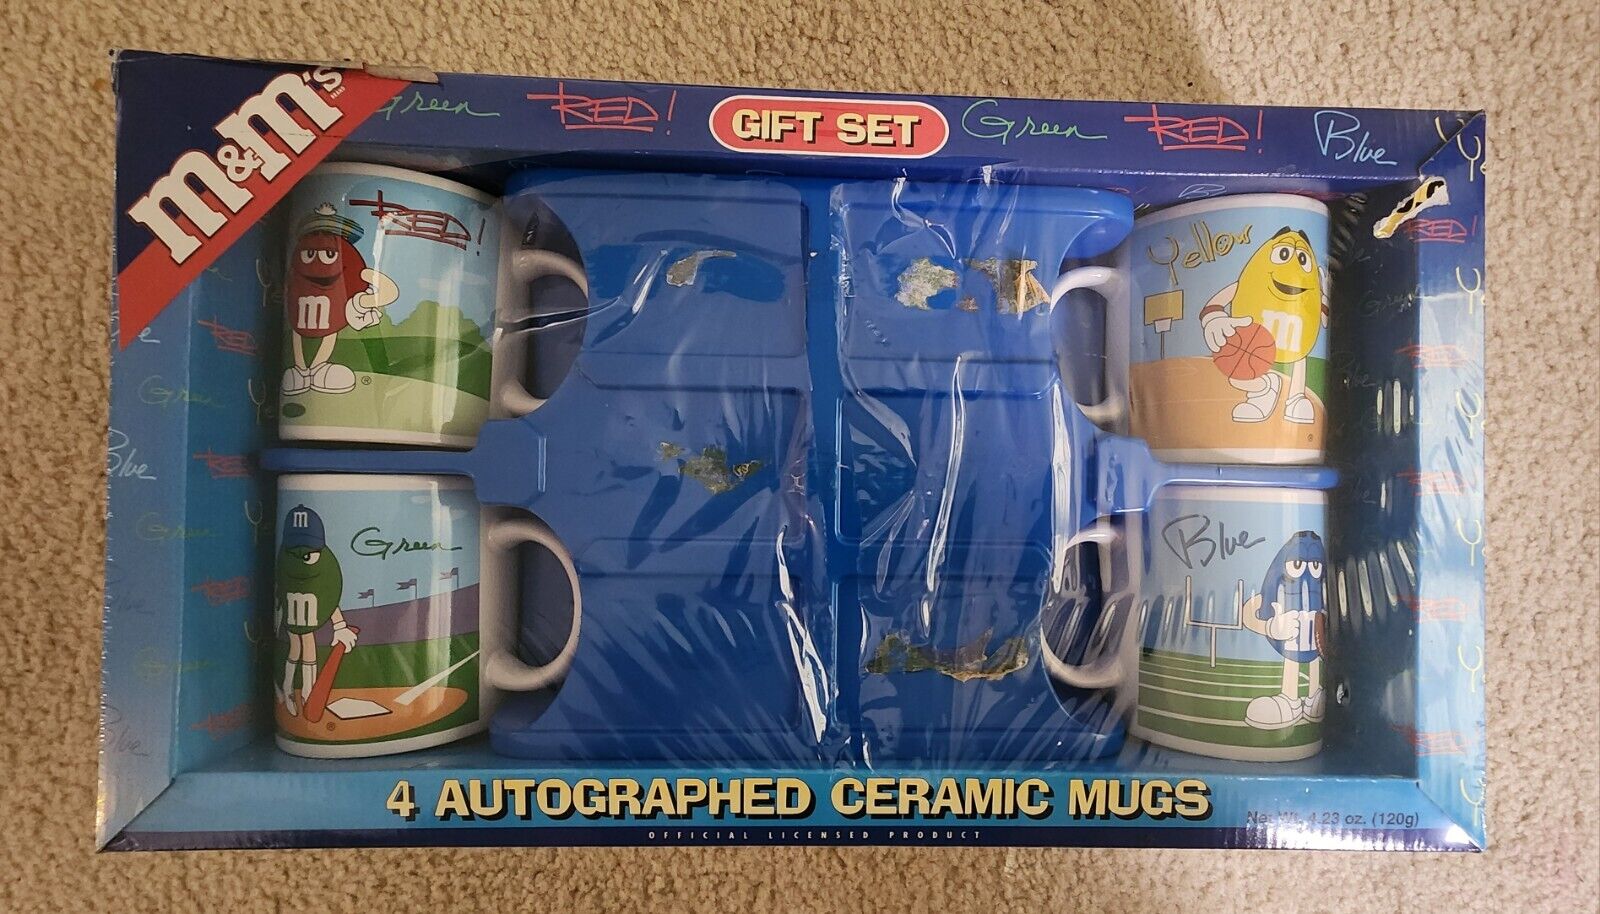 M&M\'s Sports Gift Mug Set 2003 Galerie Autographed Ceramic Mugs - Candy Removed